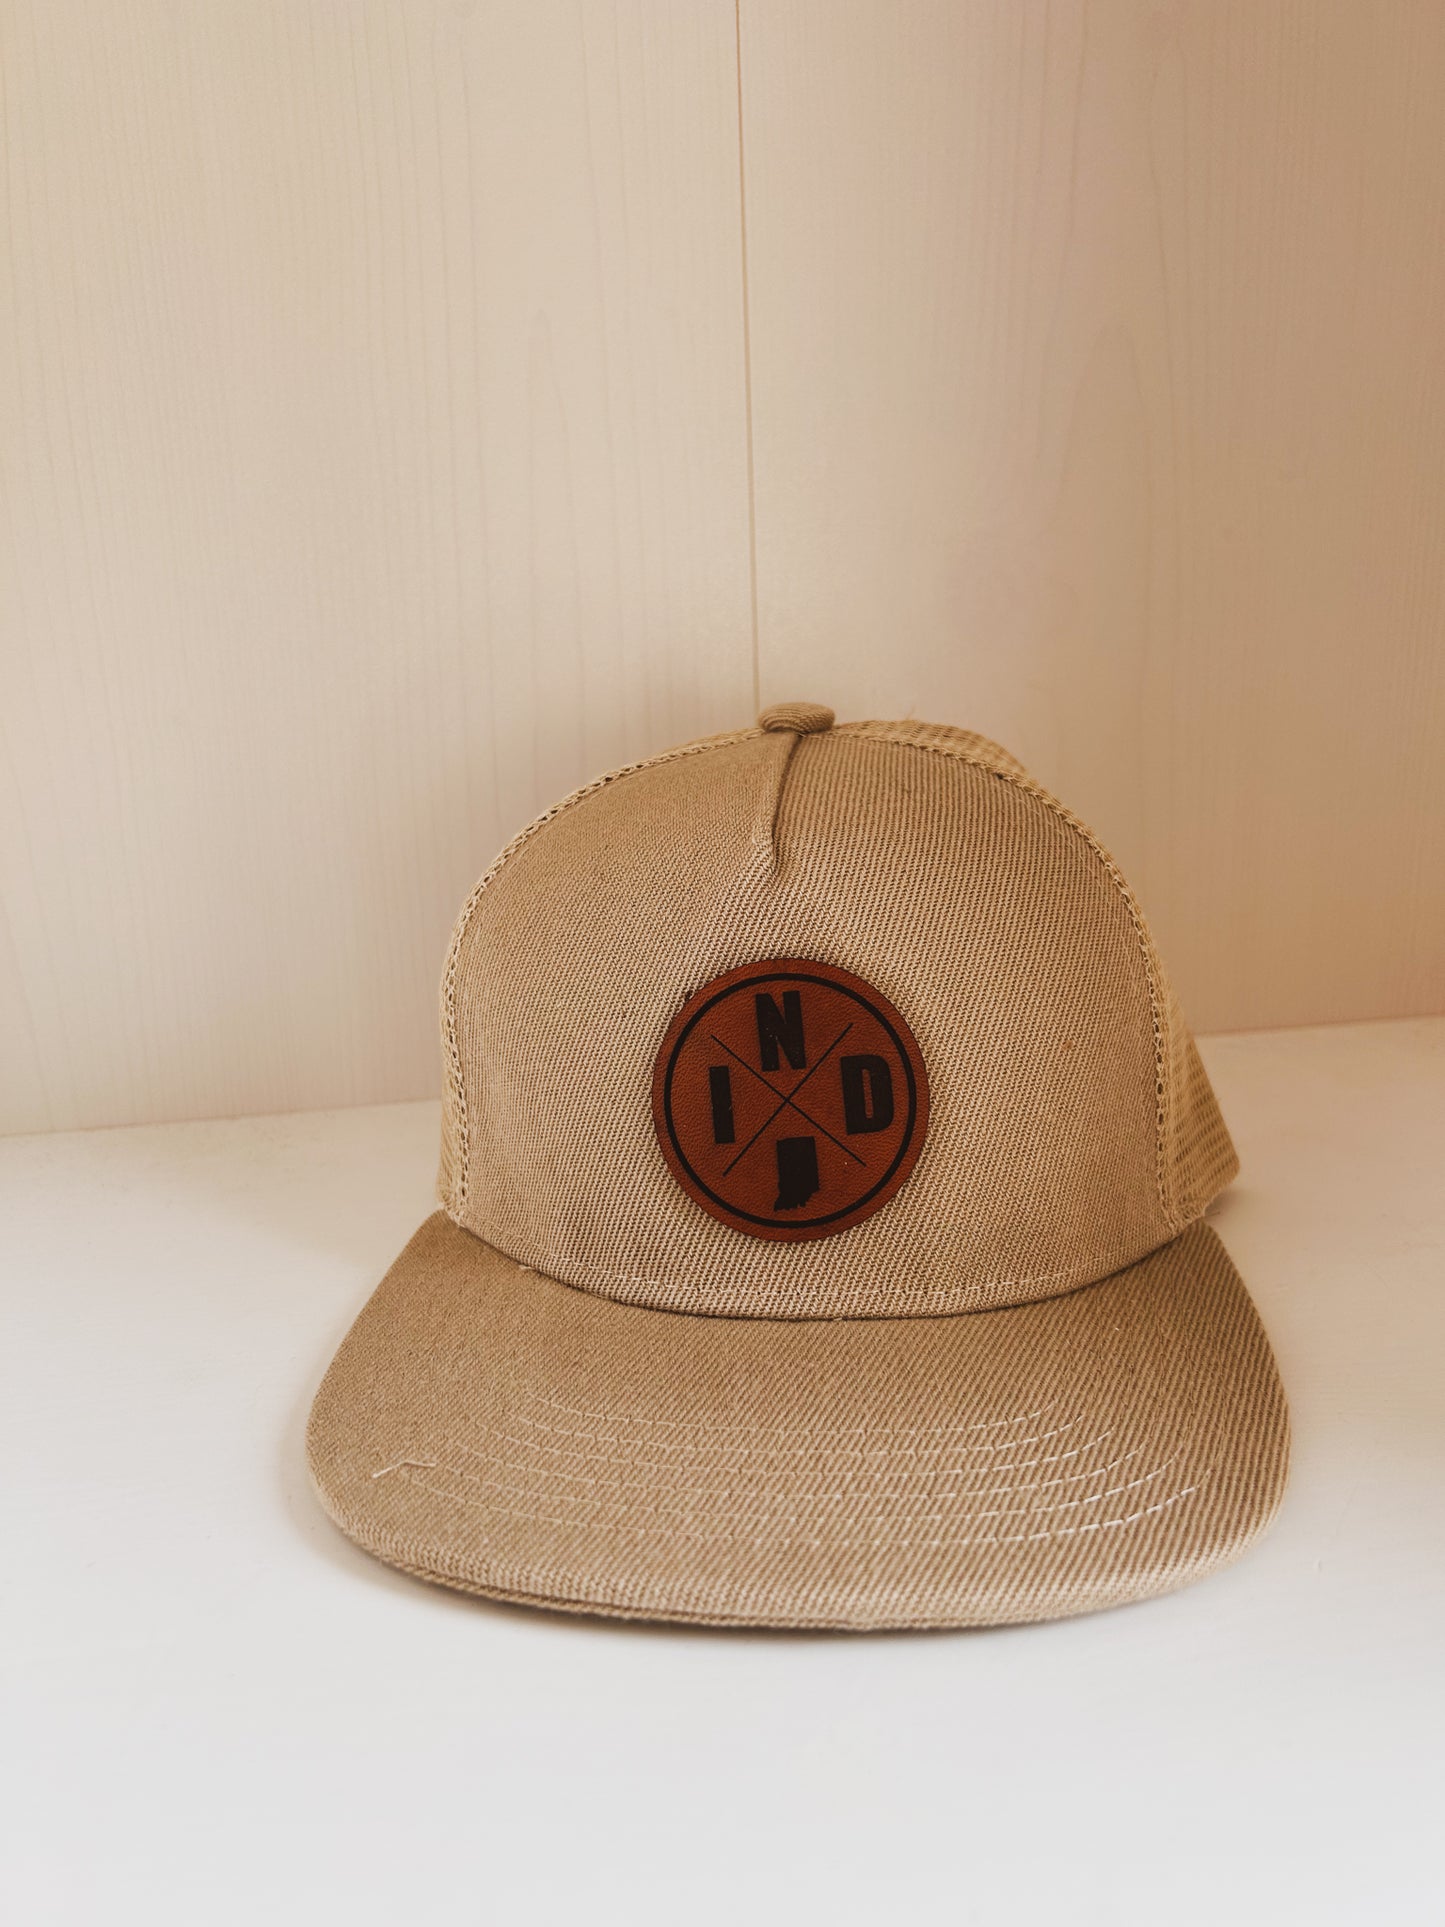 Circle IND Leather Patch on Khaki Trucker Hat - Kids